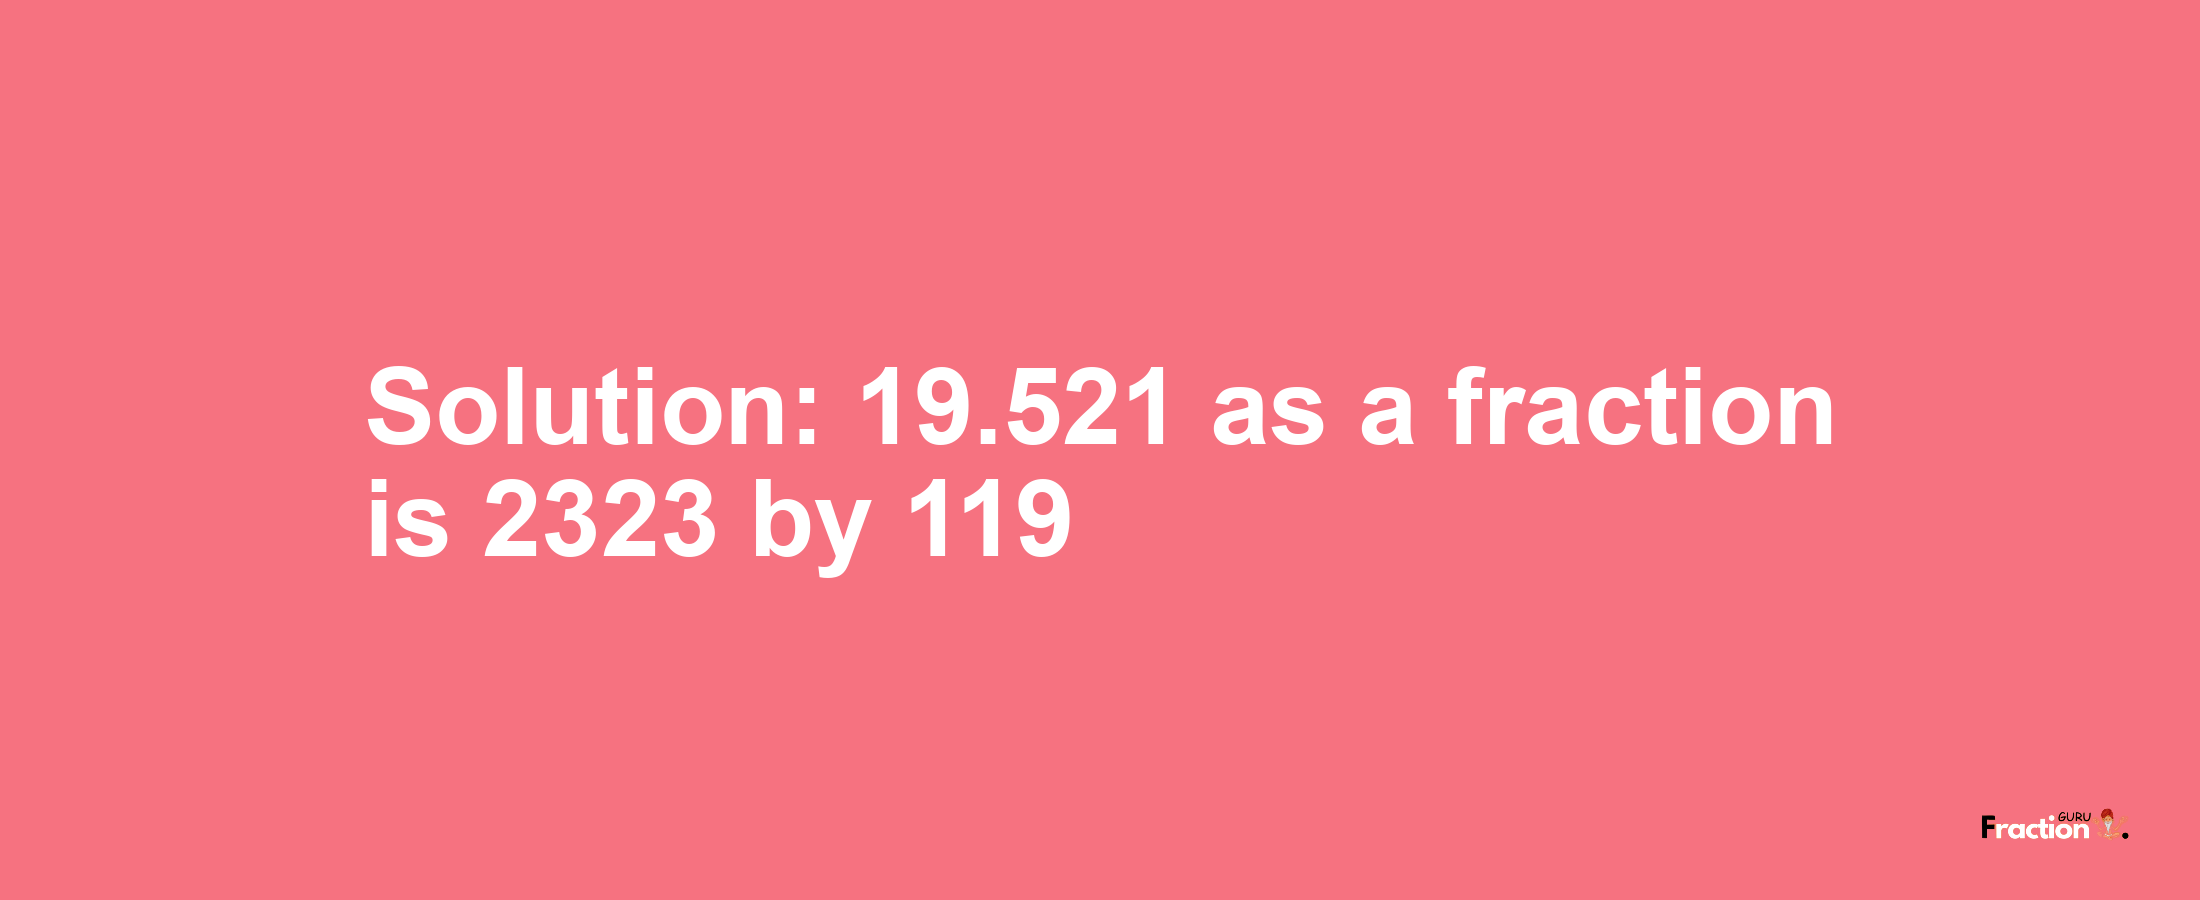 Solution:19.521 as a fraction is 2323/119